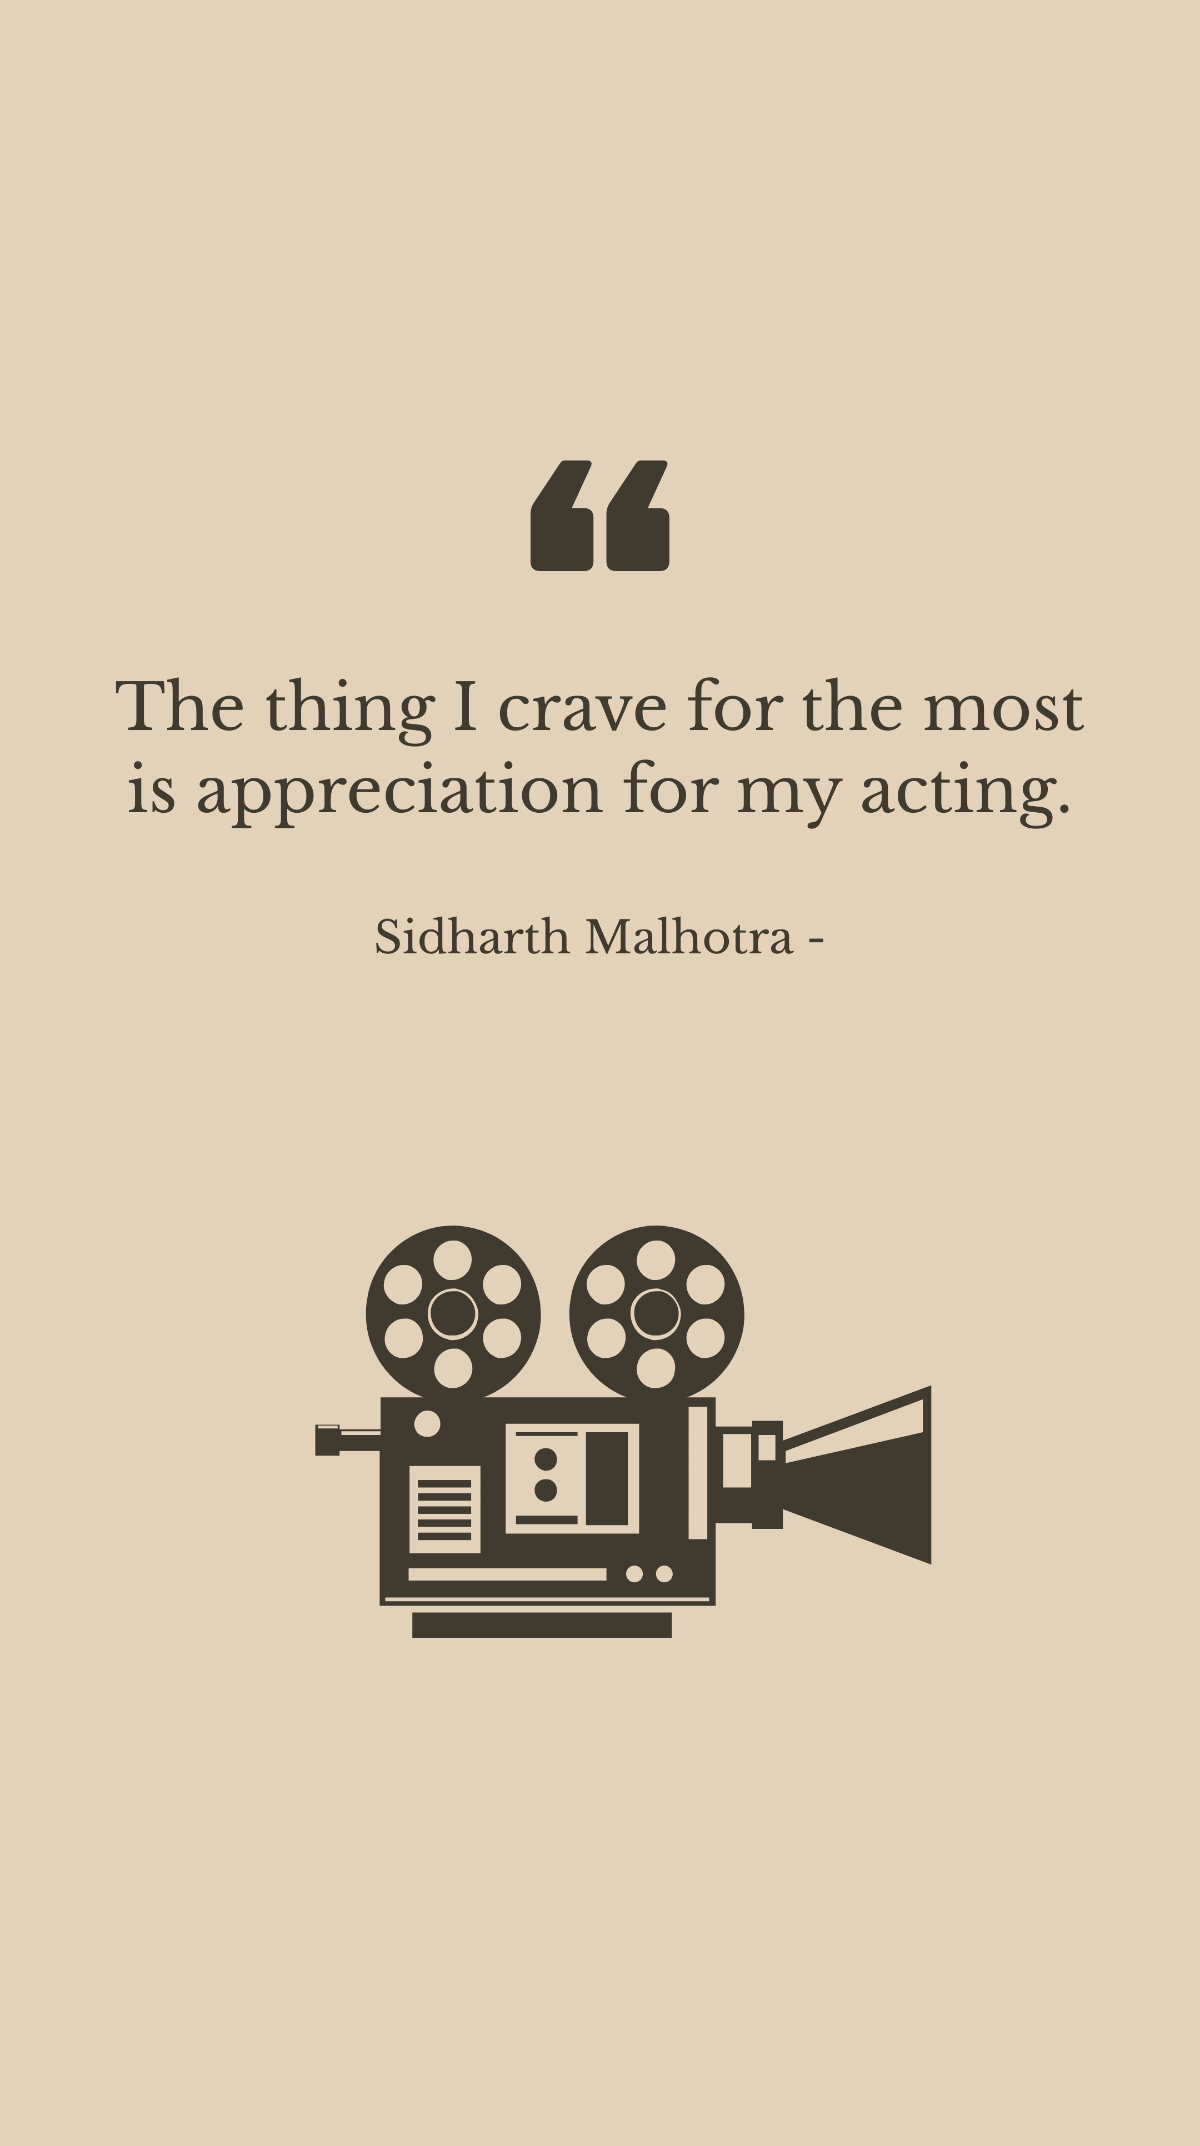 Sidharth Malhotra - The thing I crave for the most is appreciation for my acting.